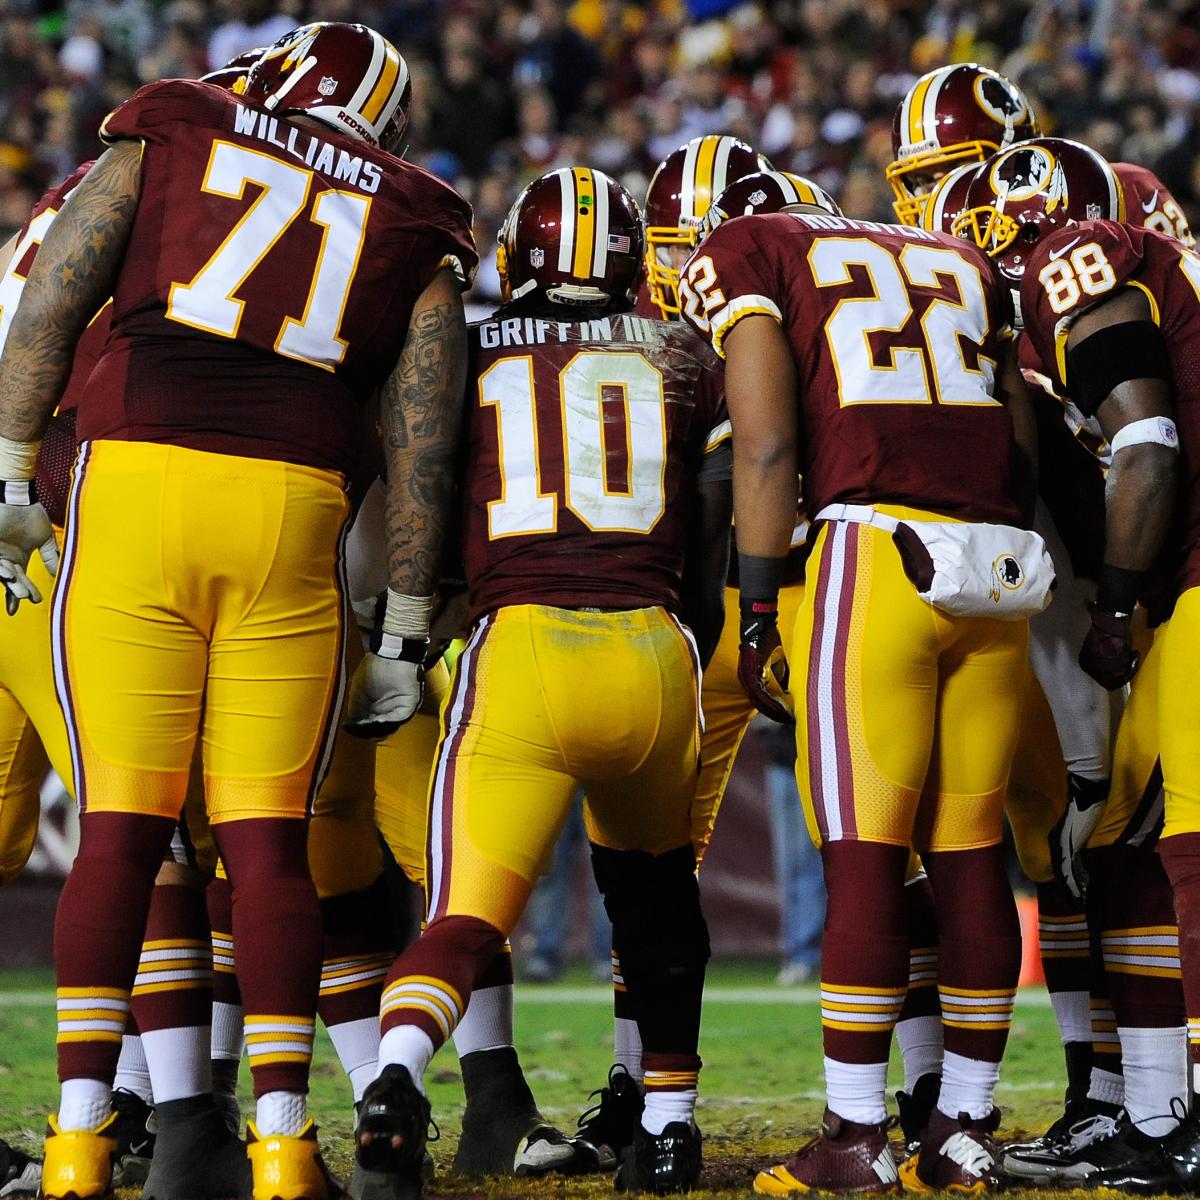 Breaking Down the Washington Redskins' Strength of Schedule for 2013